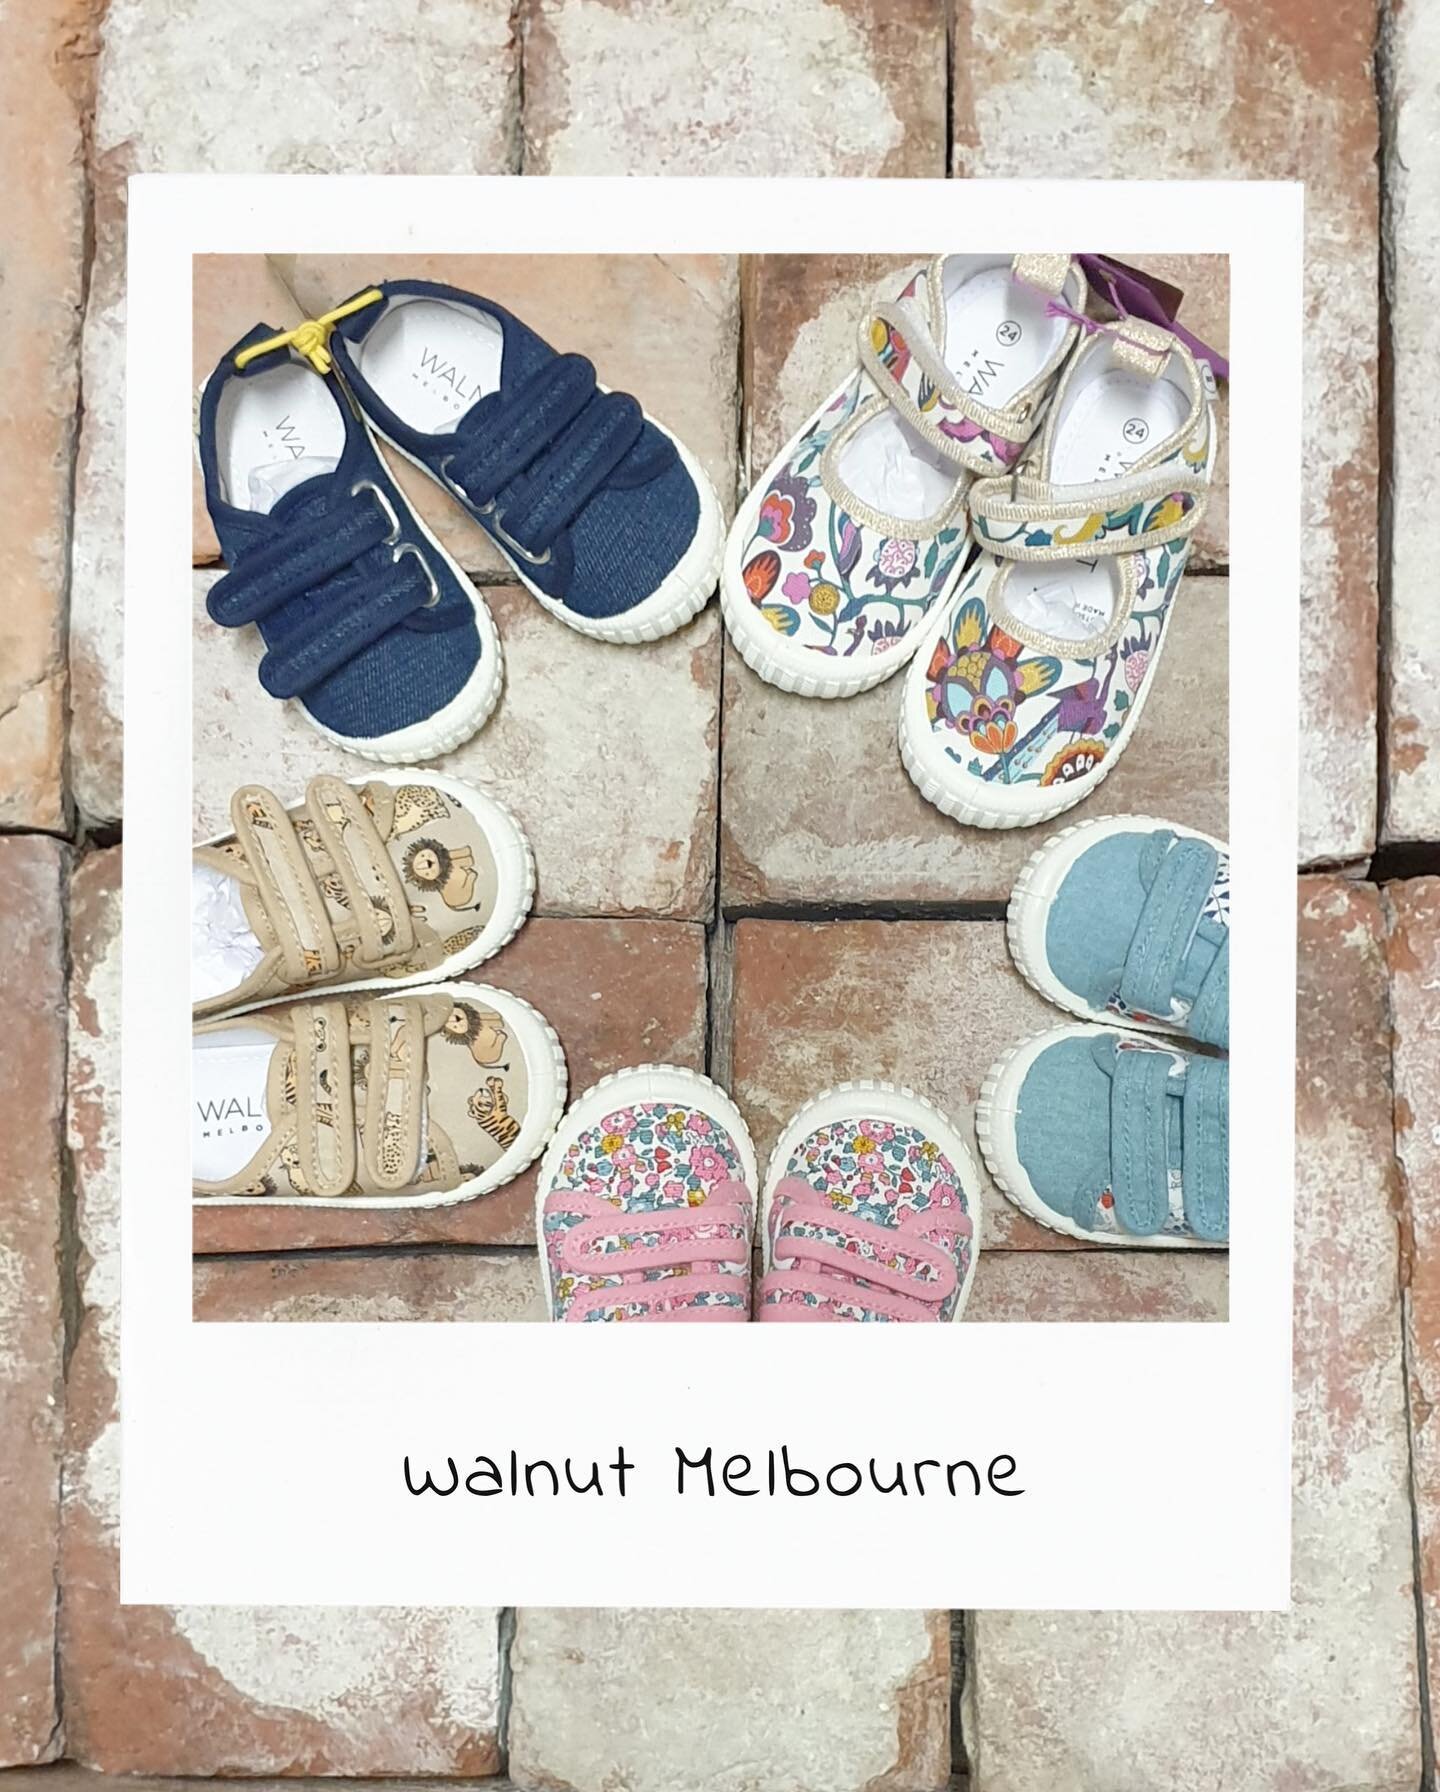 New to our store Walnut shoes, the cutest canvas shoe and a great price point. Check them out online now www.puddletown.com.au.  #walnutmelbourne #puddletown #shoponline #shoplocal #childrenshoes